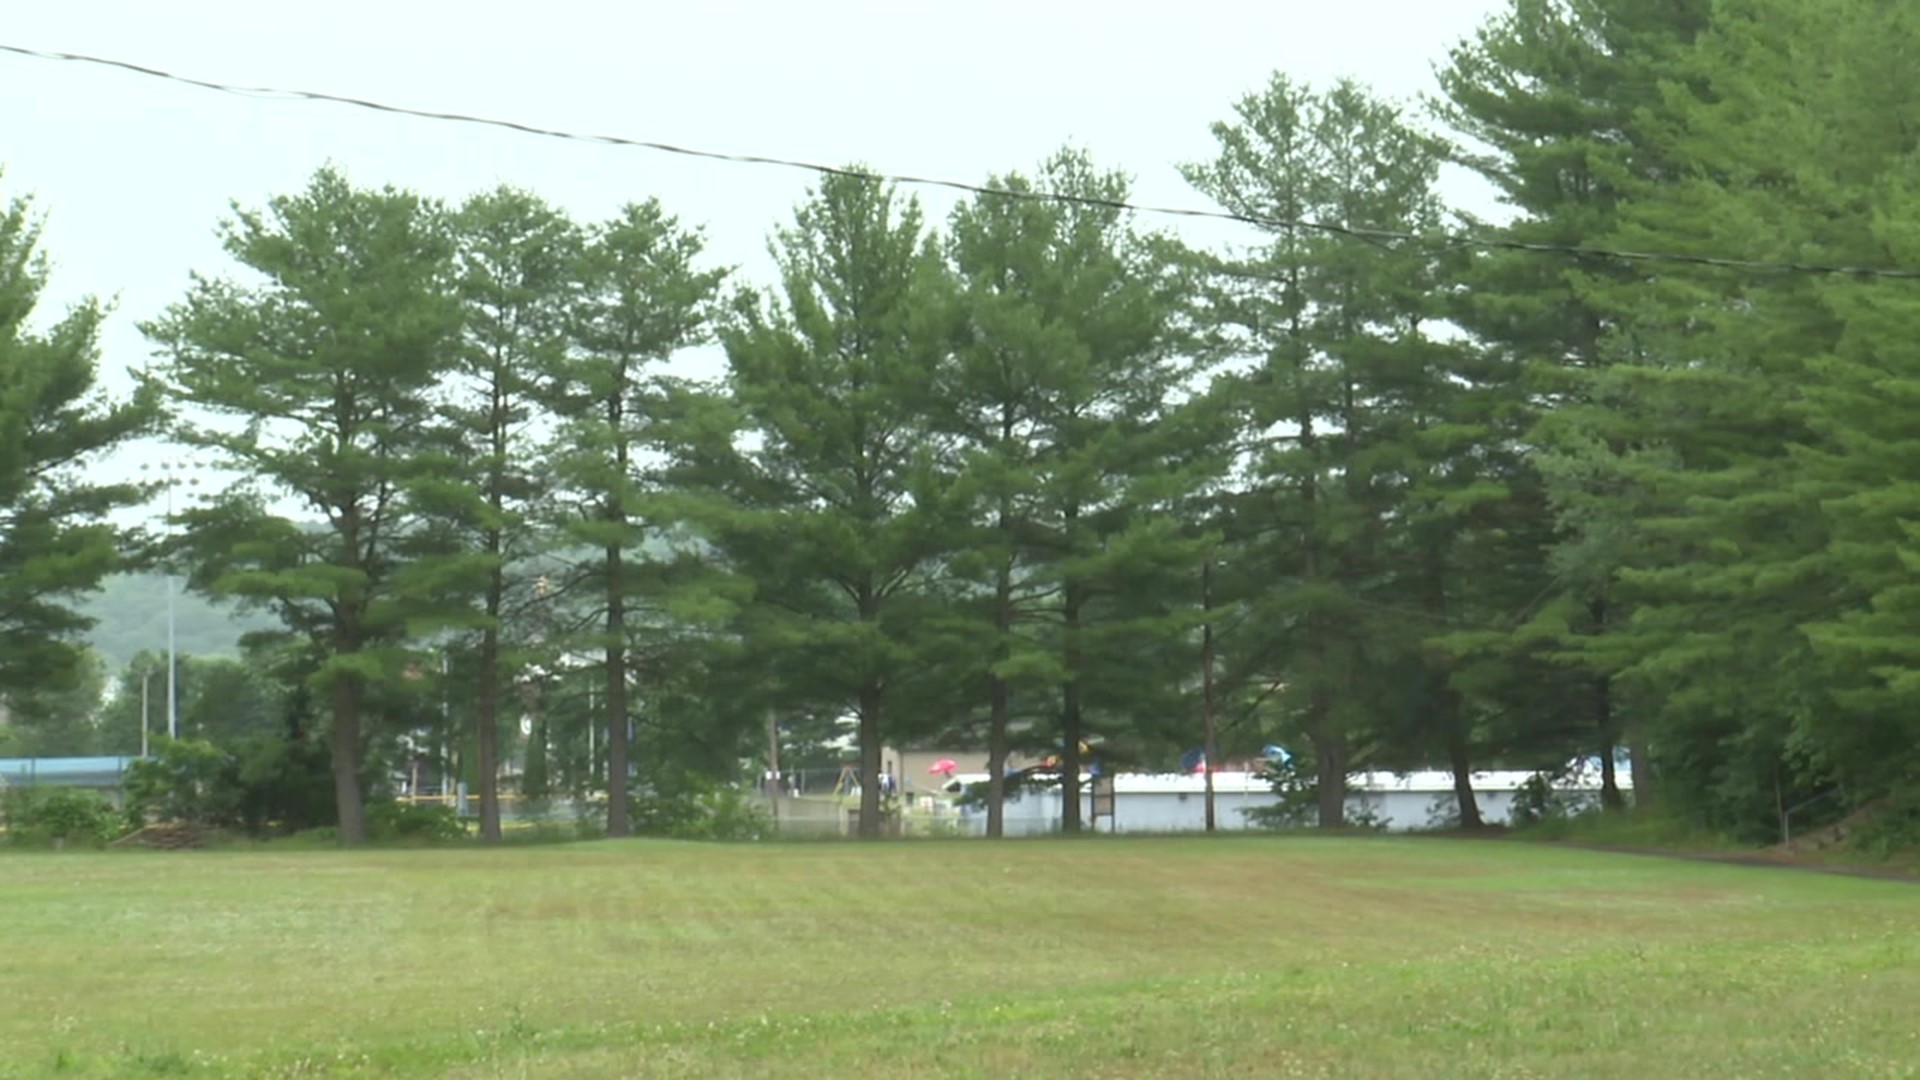 A nonprofit organization based in Schuylkill County that supports children with special needs has plans to bring a one-of-a-kind playground to the area.